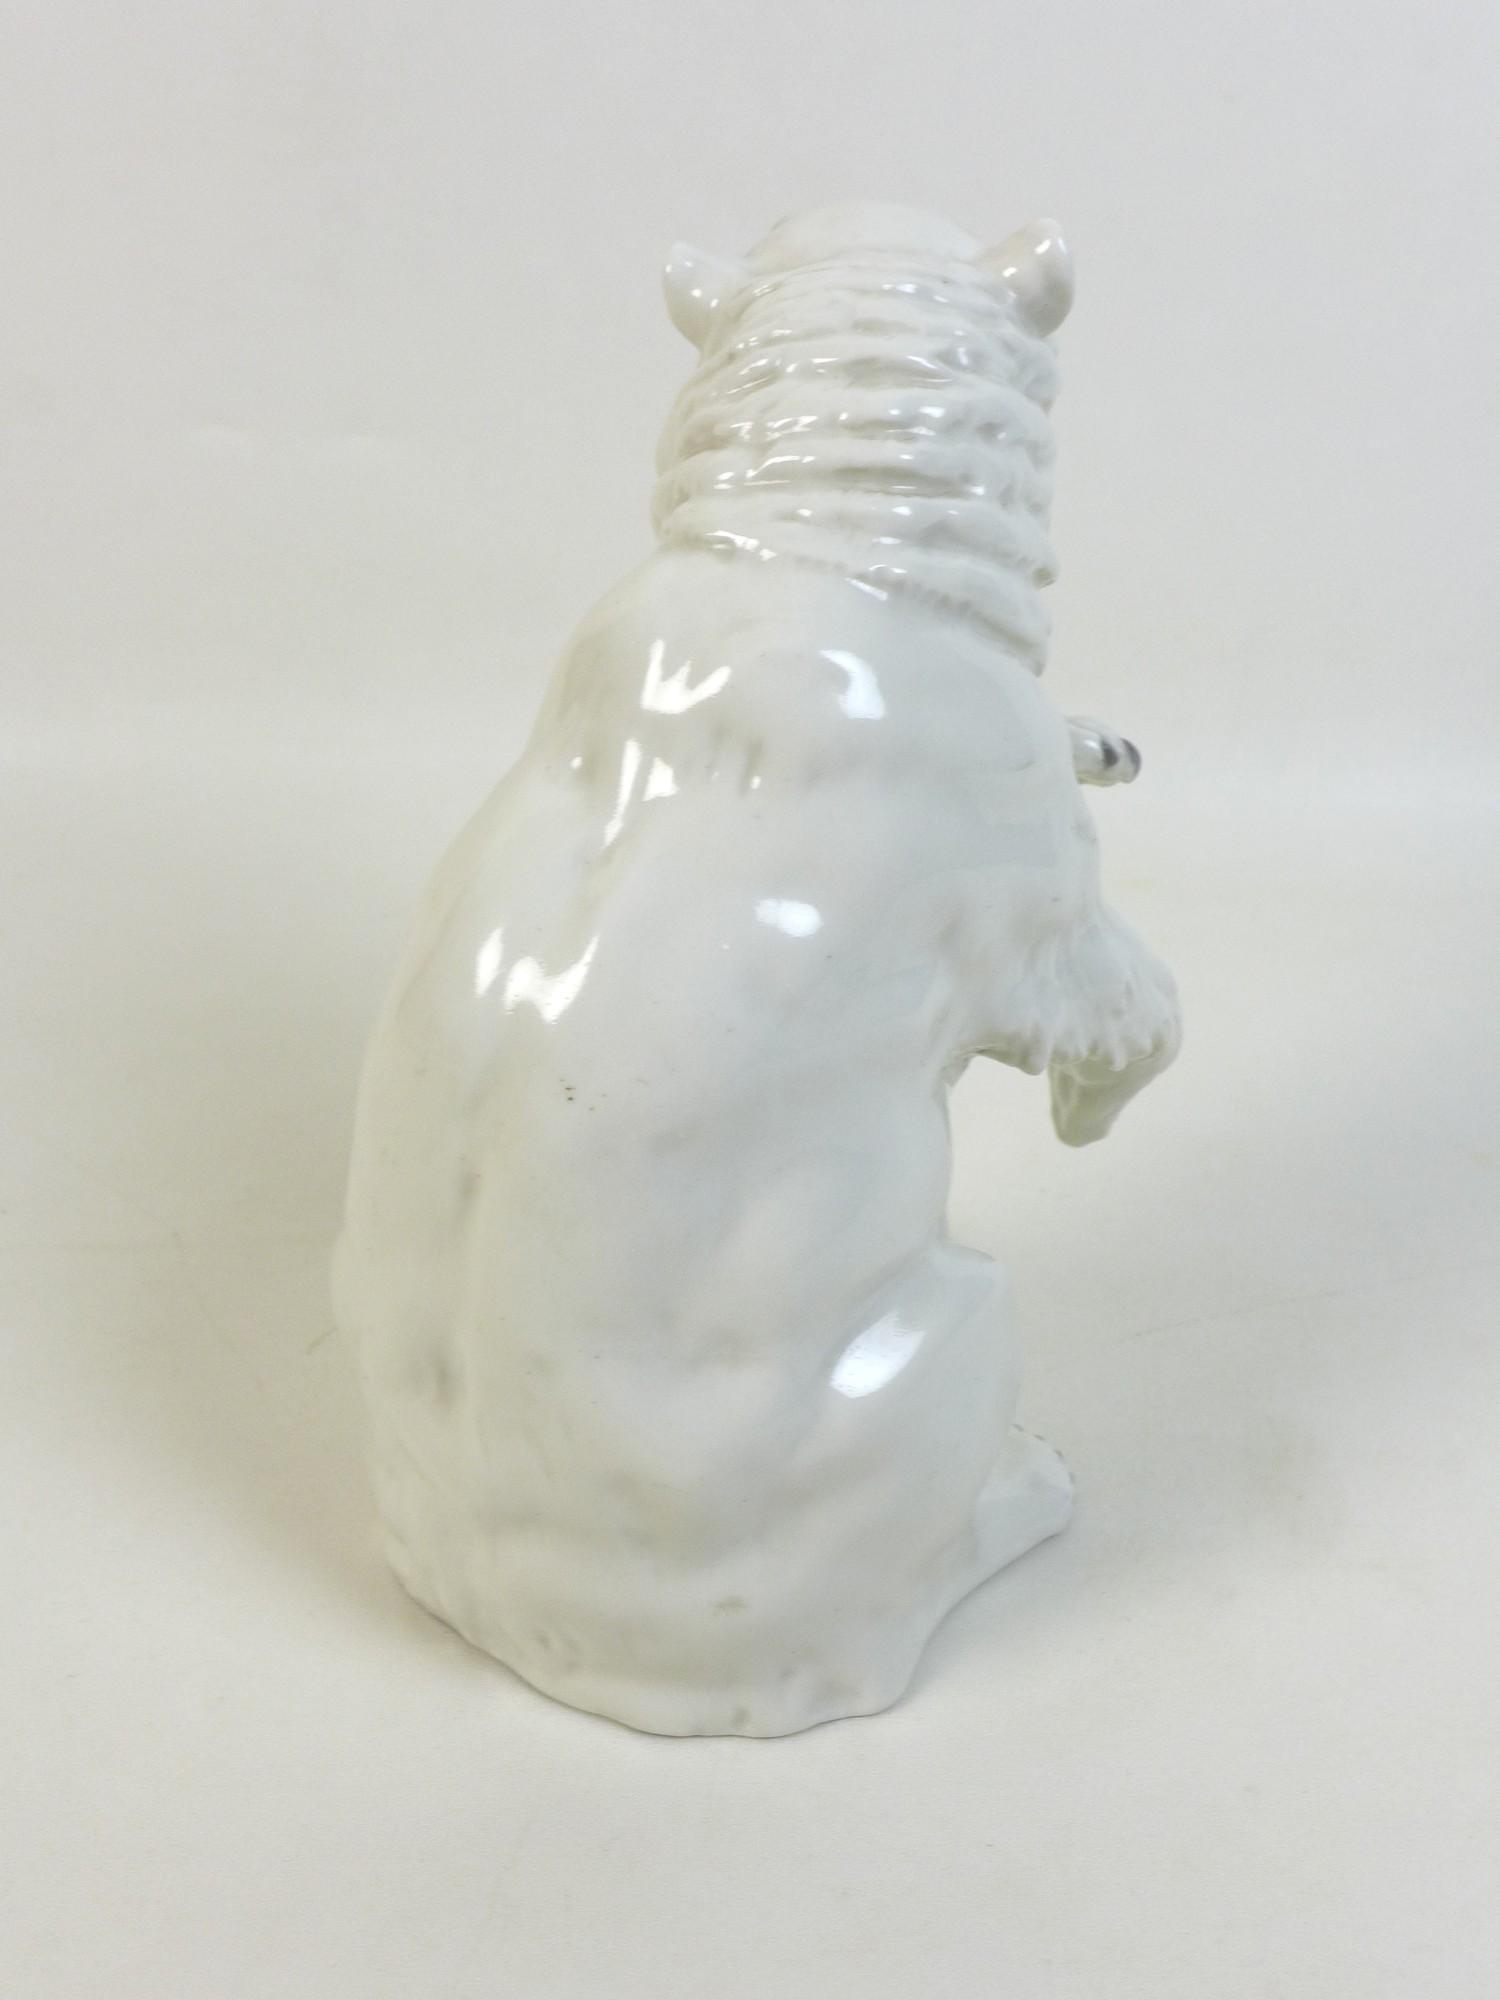 A 20th century Sitzendorf Polar bear figurine, the bear posed bearing teeth and rearing up from - Image 3 of 9